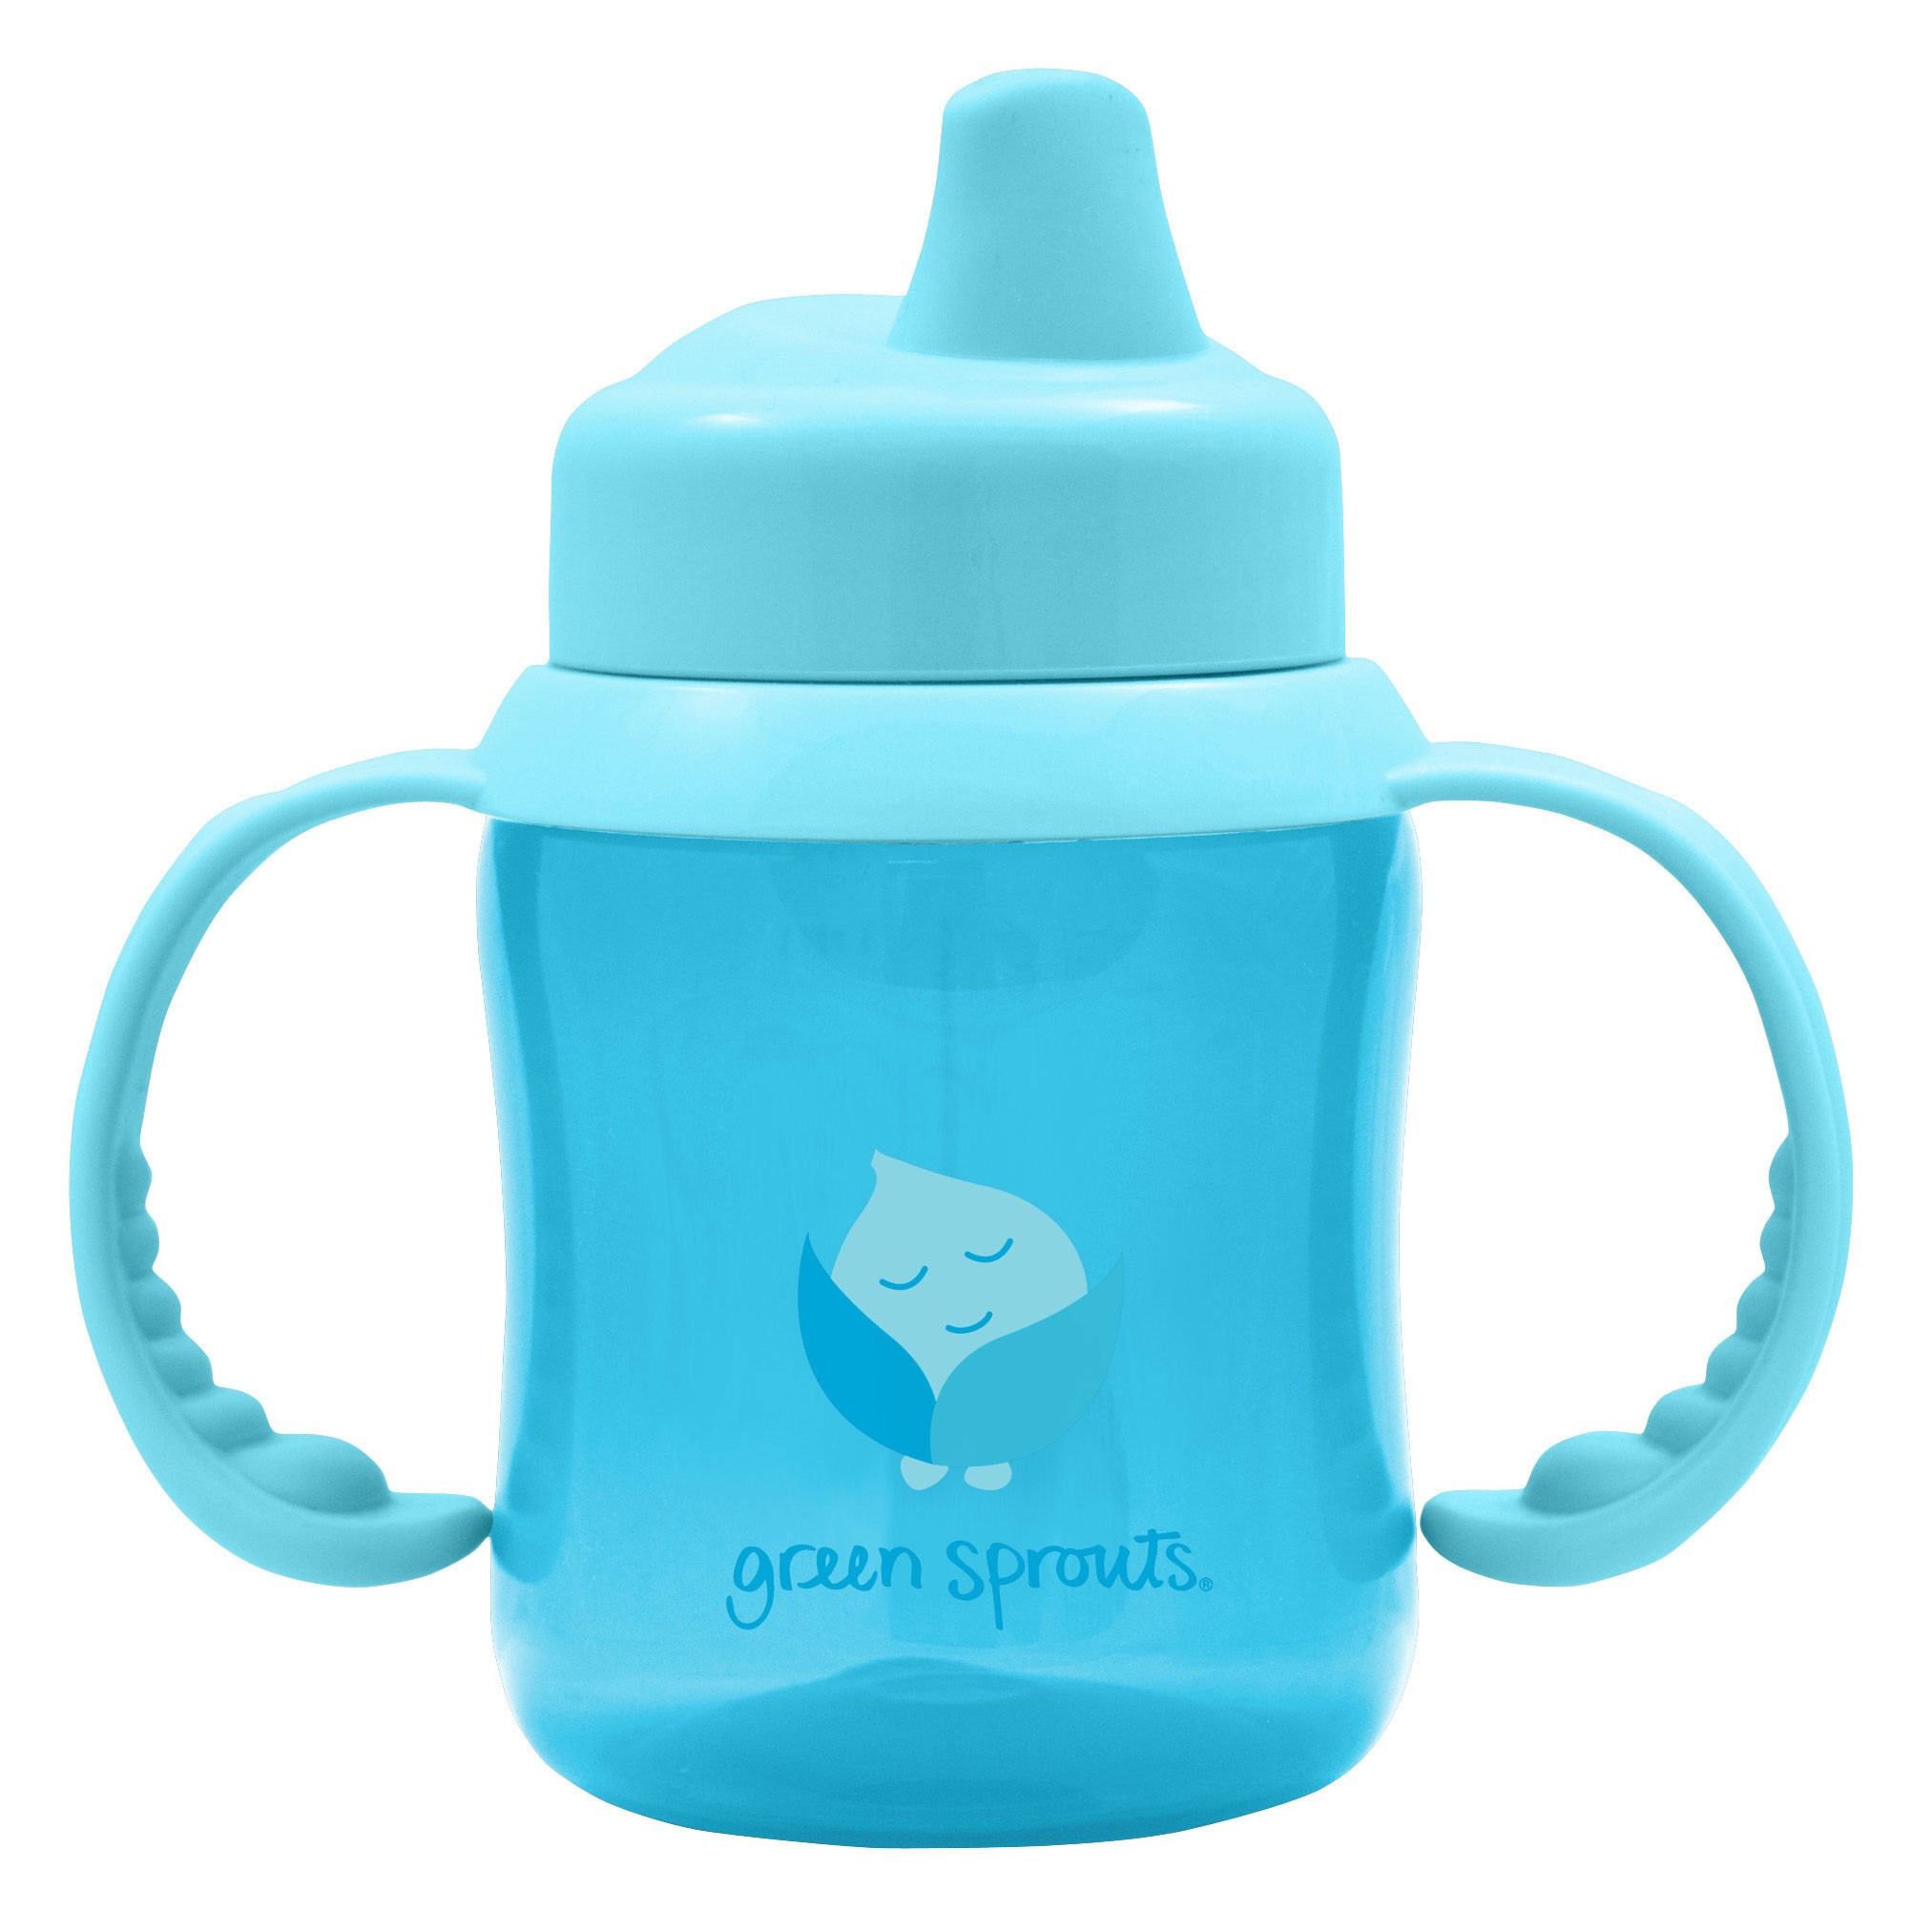 iPlay Green Sprouts Non-Spill Sippy Cup in Aqua